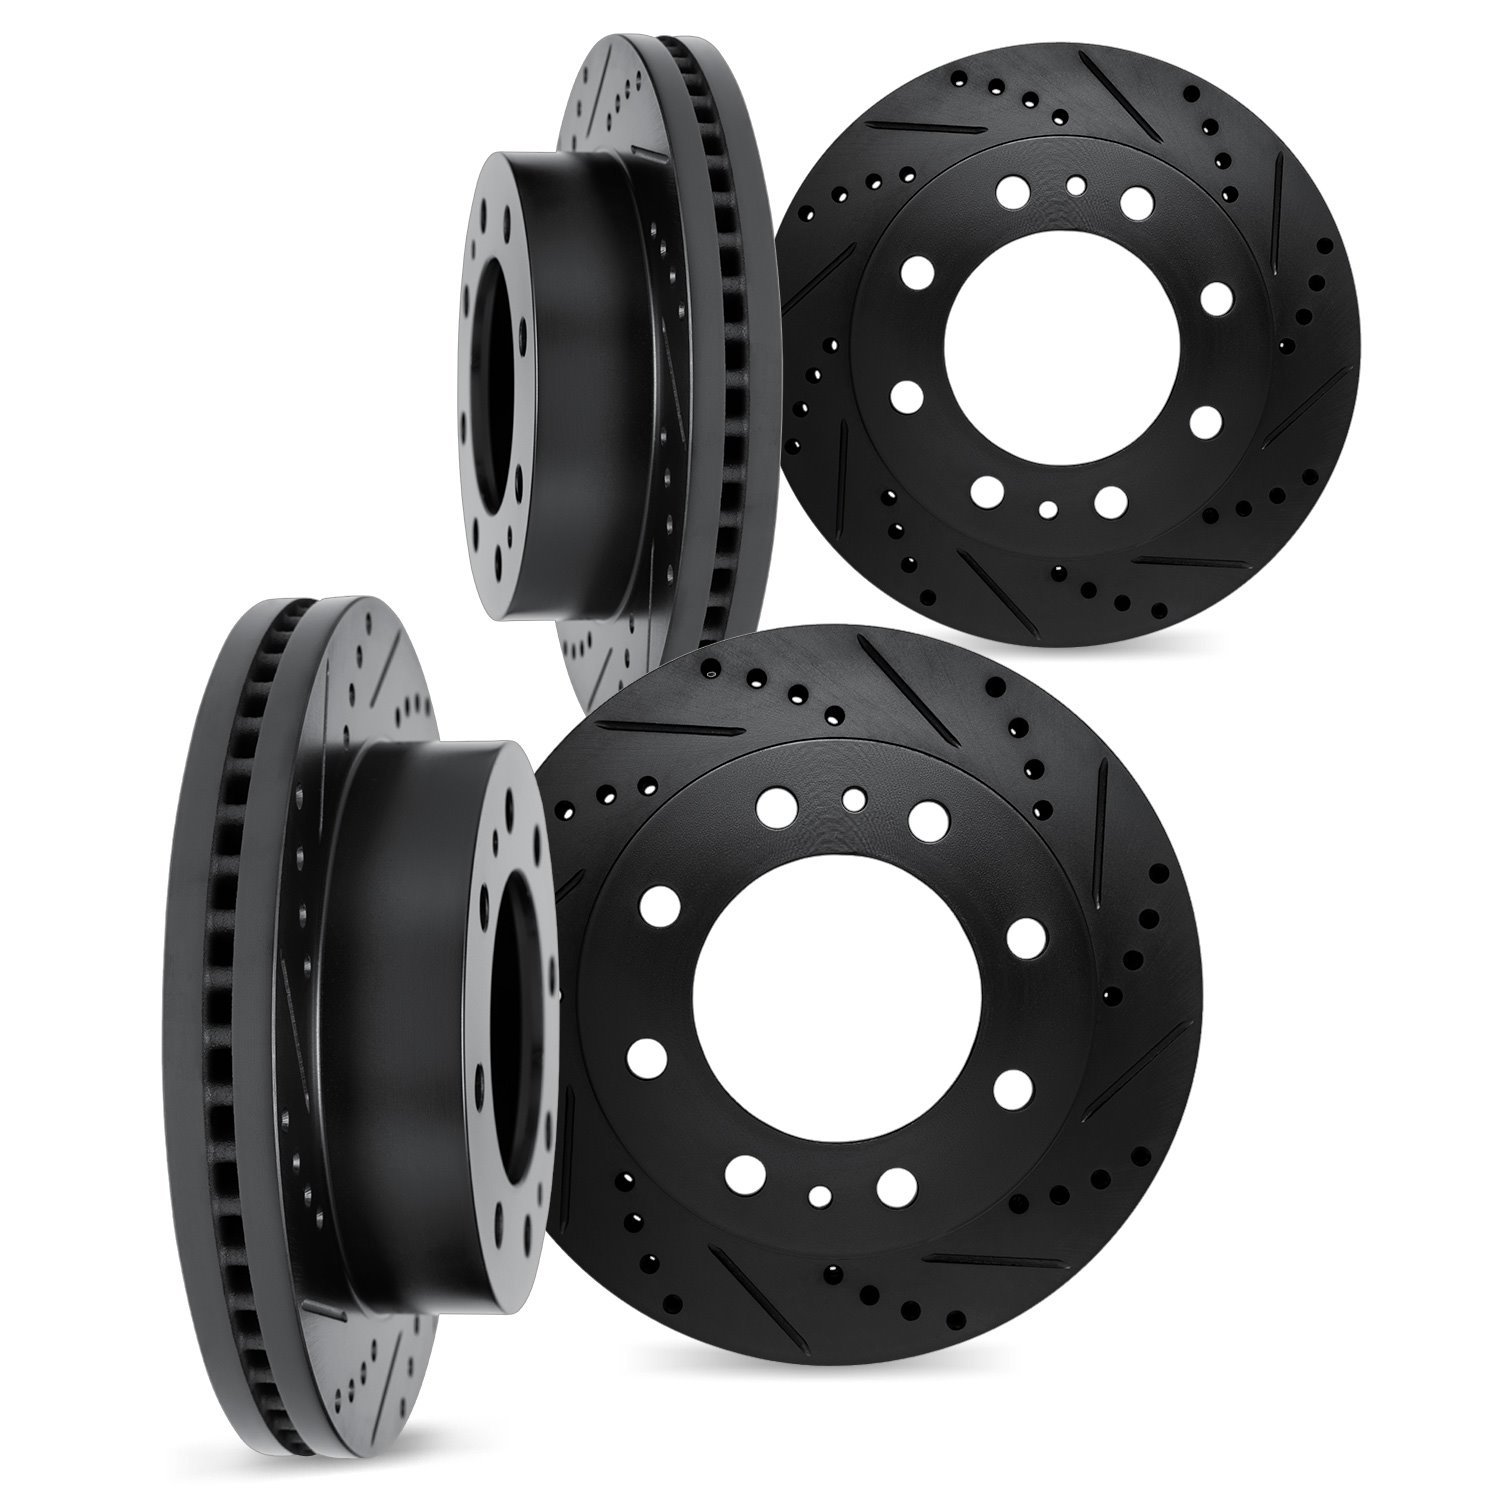 8004-54035 Drilled/Slotted Brake Rotors [Black], Fits Select Ford/Lincoln/Mercury/Mazda, Position: Front and Rear